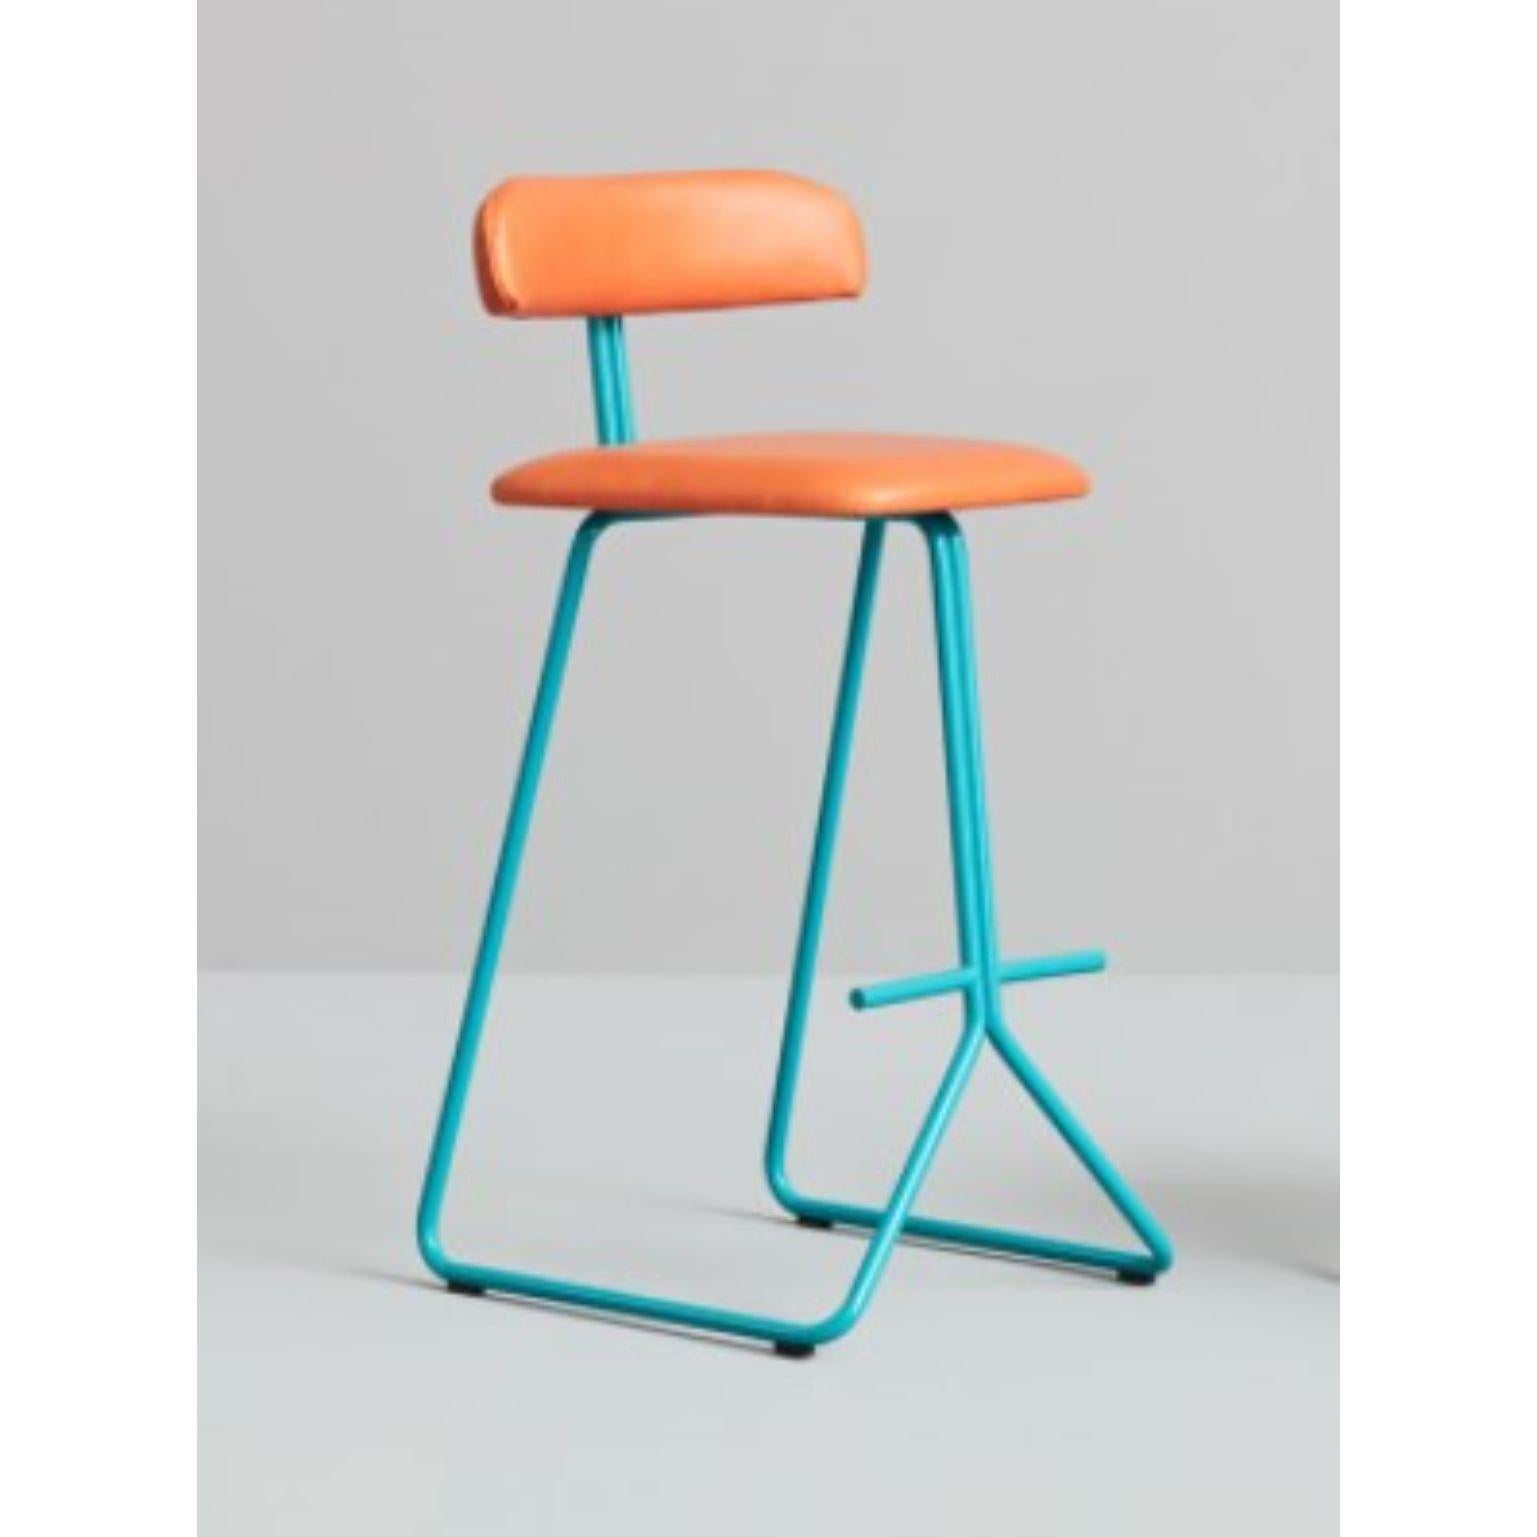 Pair of rider stool by Pepe Albargues
Dimensions: W 50, D 56, H 104, Seat78
Materials: Crome plated or painted iron structure
Foam CMHR (high resilience and flame retardant) for all our cushion filling systems
Copper(gloss-matt)